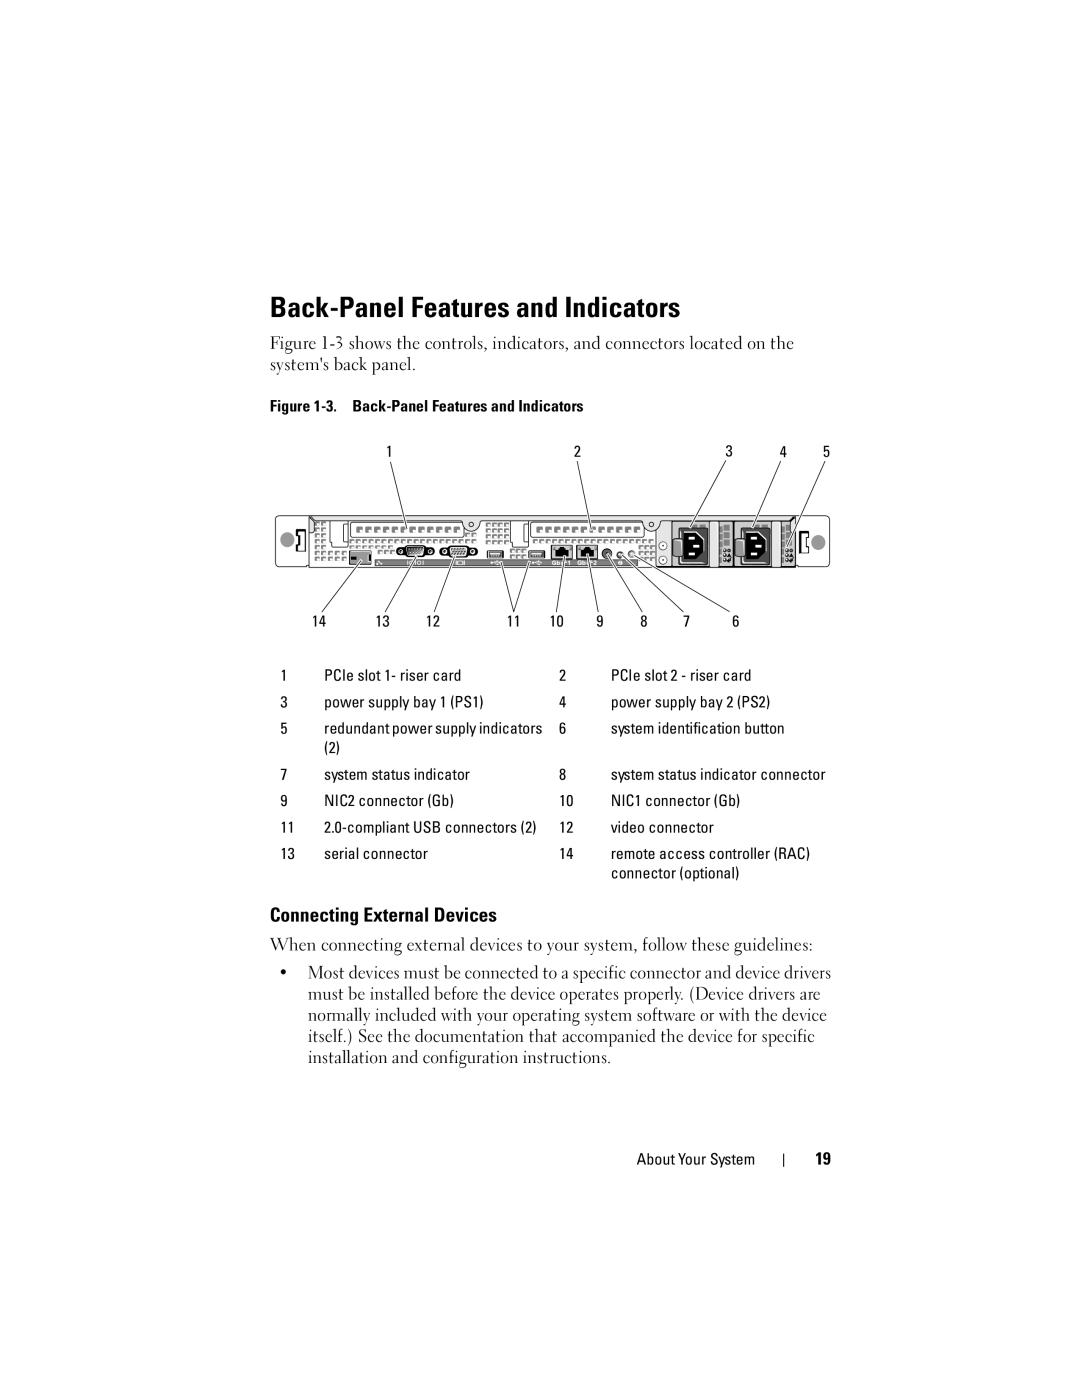 Dell R300 owner manual Back-Panel Features and Indicators, Connecting External Devices 